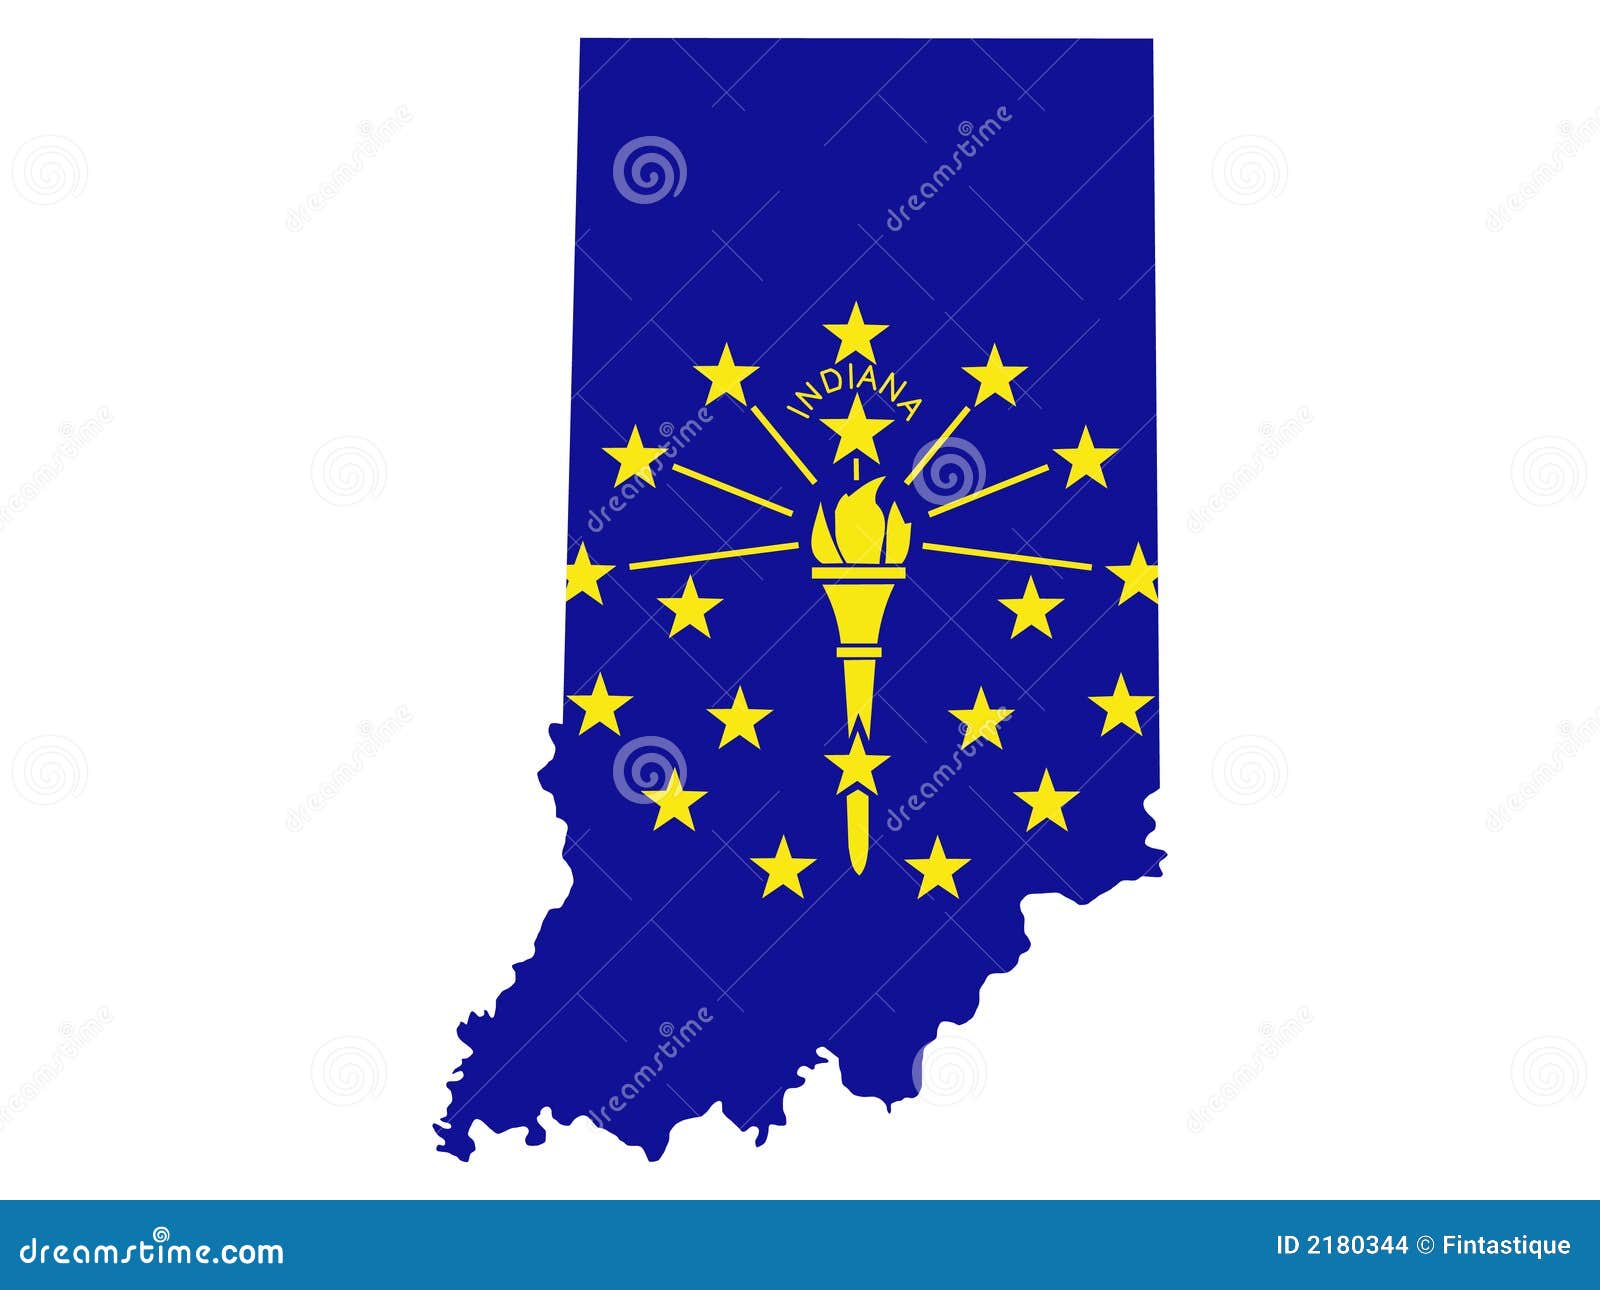 clipart map of indiana - photo #12